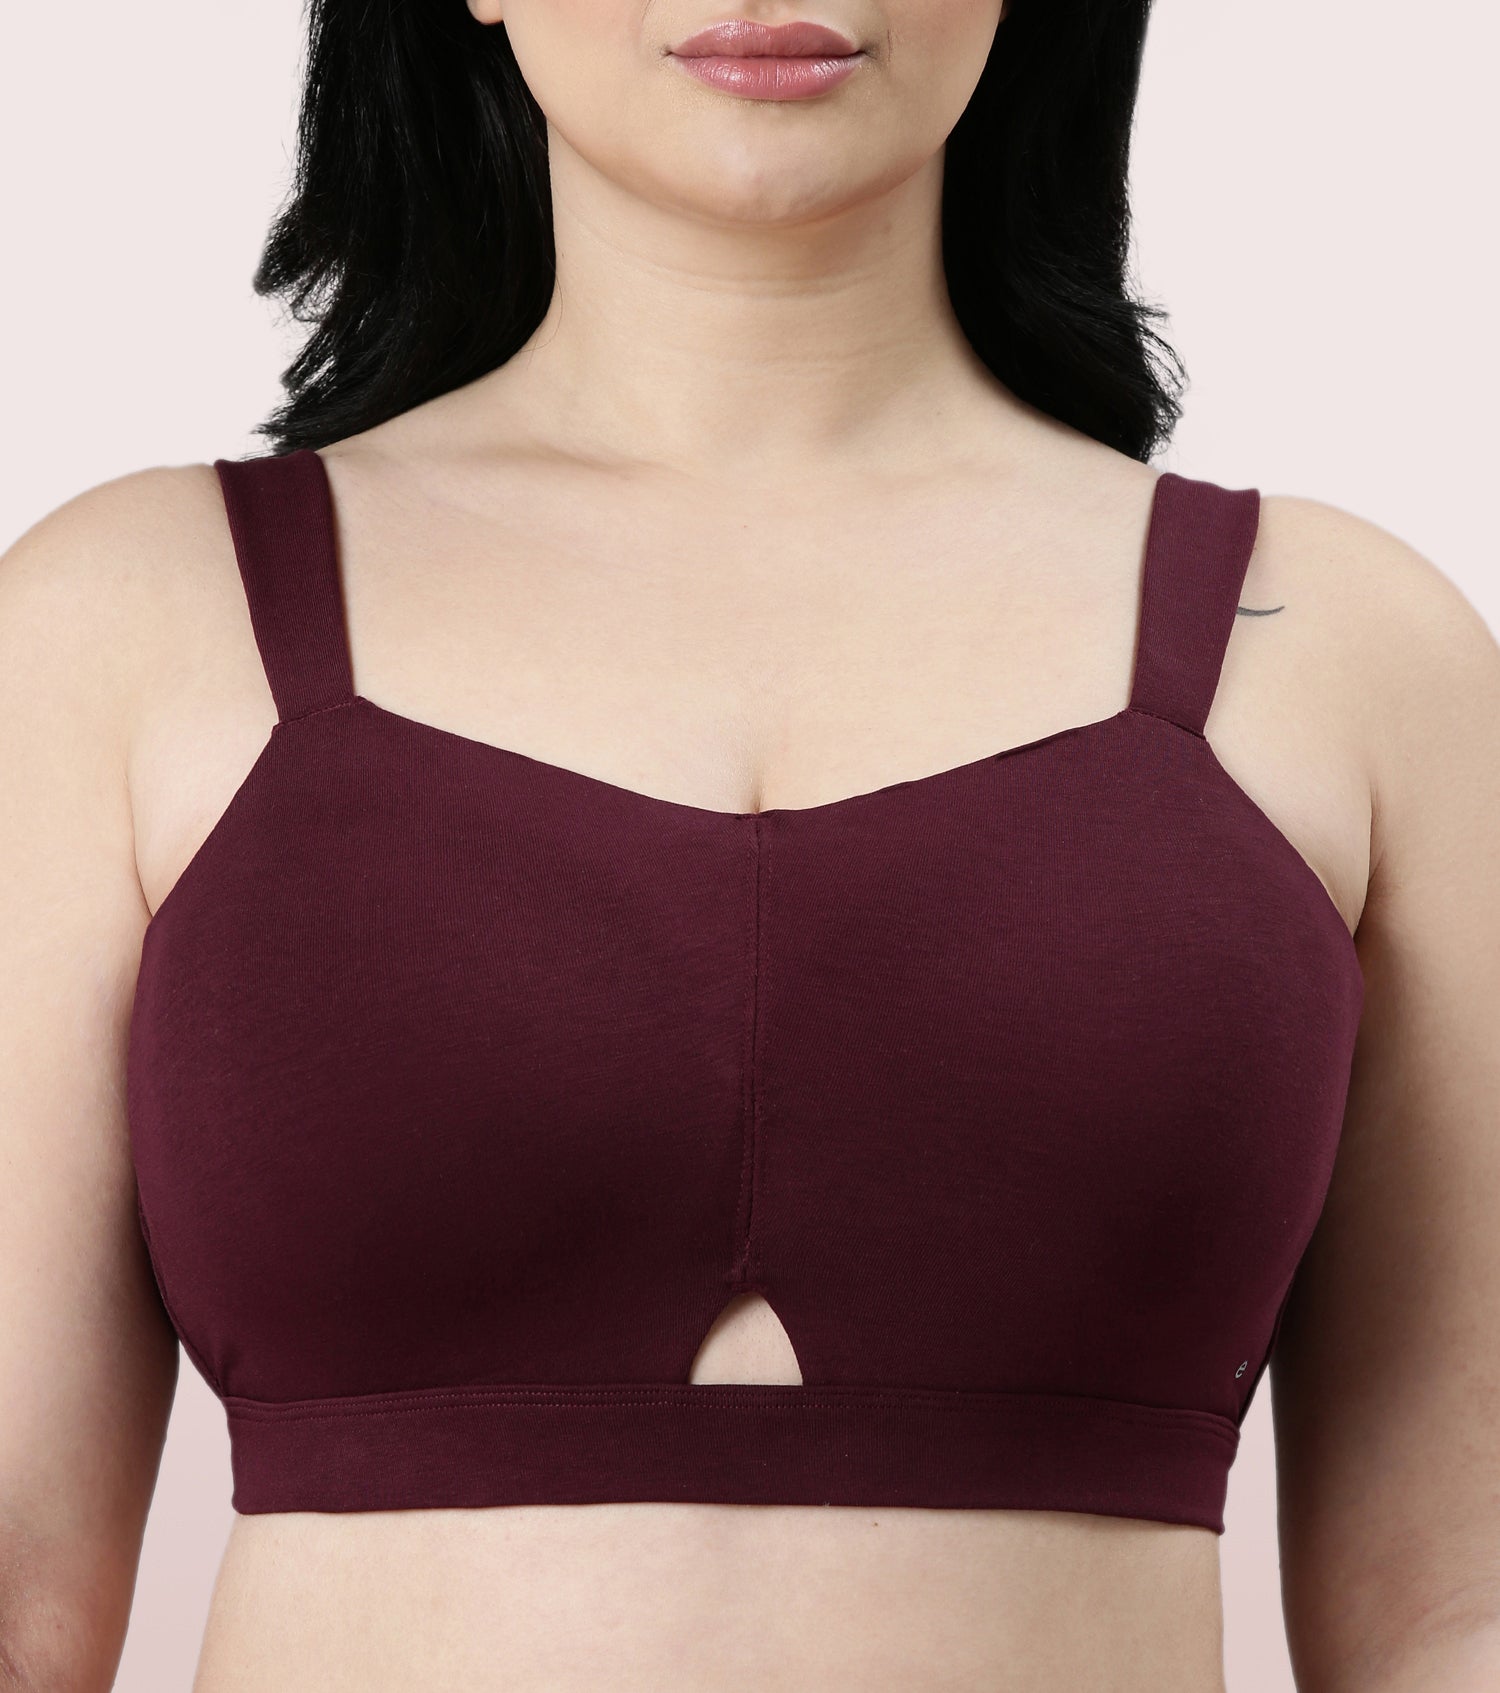 Enamor Soft Cotton Full Coverage Padded & Wirefree Minimizer Bra A064 -  Price History